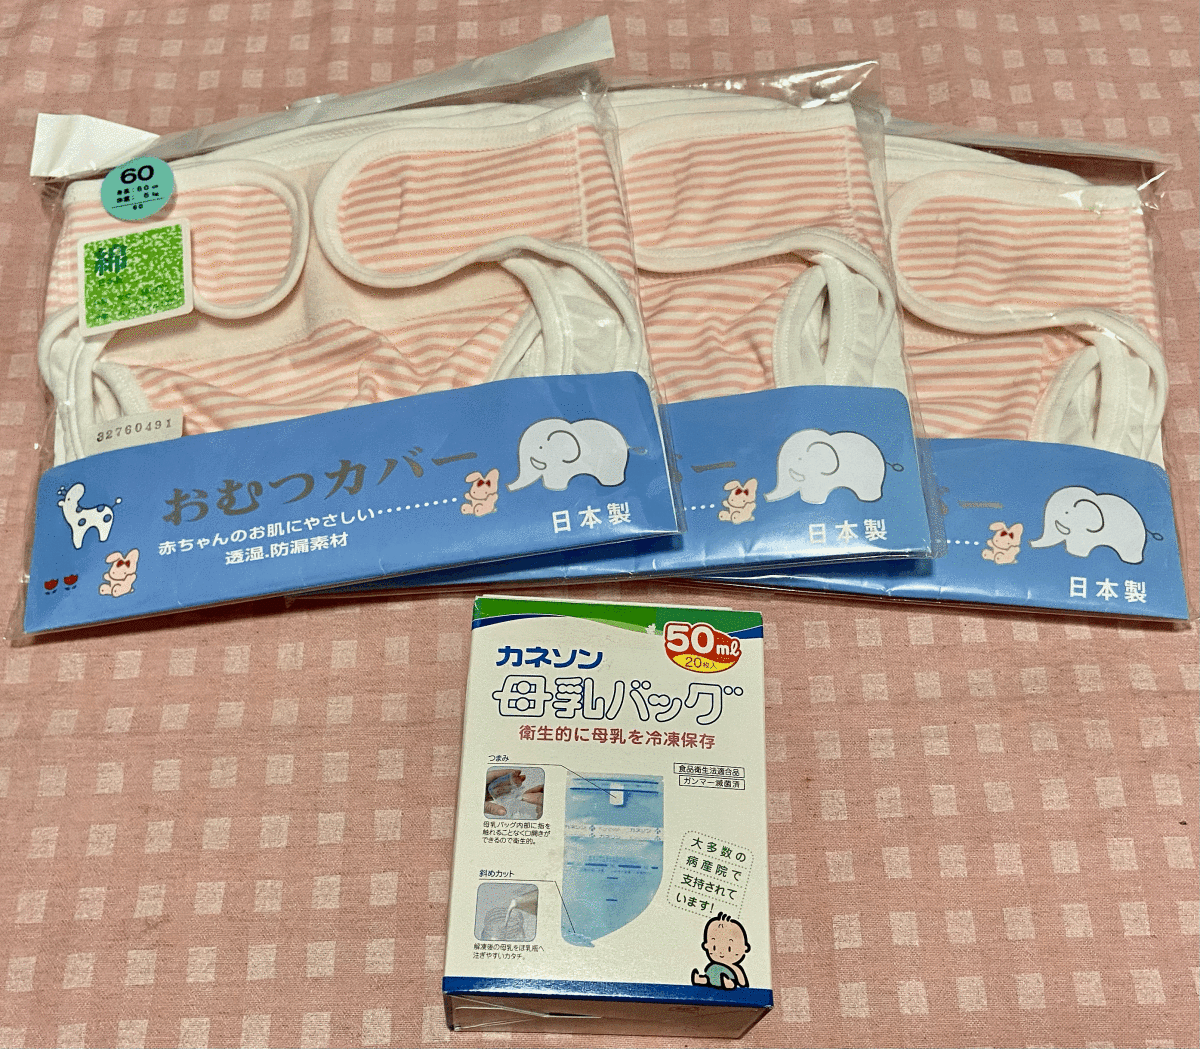  diaper cover (60)3 sheets × mother’s milk back. 4 point set 